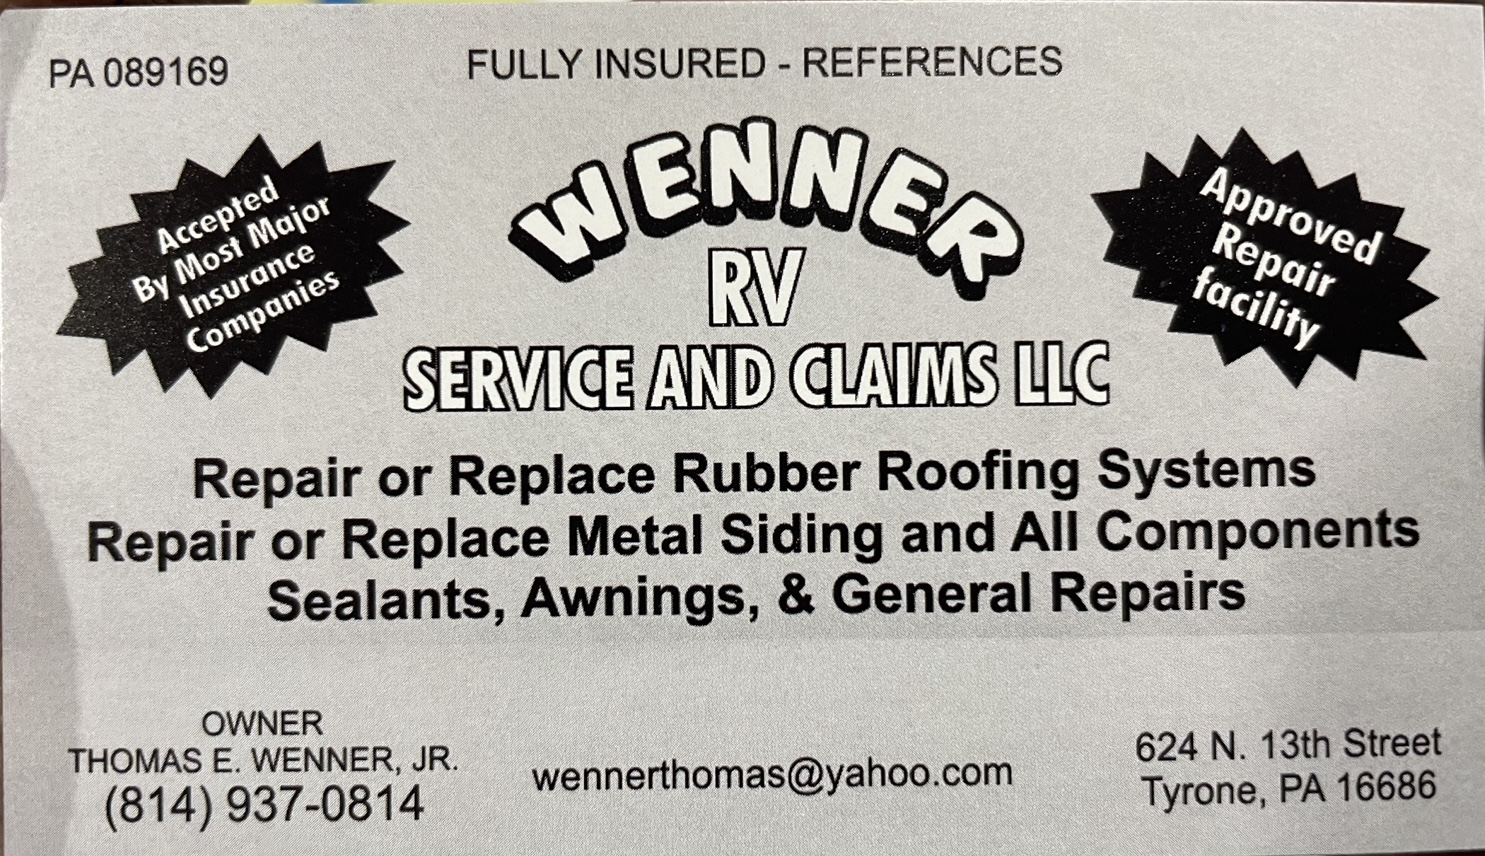 Wenner RV Service and Claims LLC 624 N 13th St, Tyrone Pennsylvania 16686